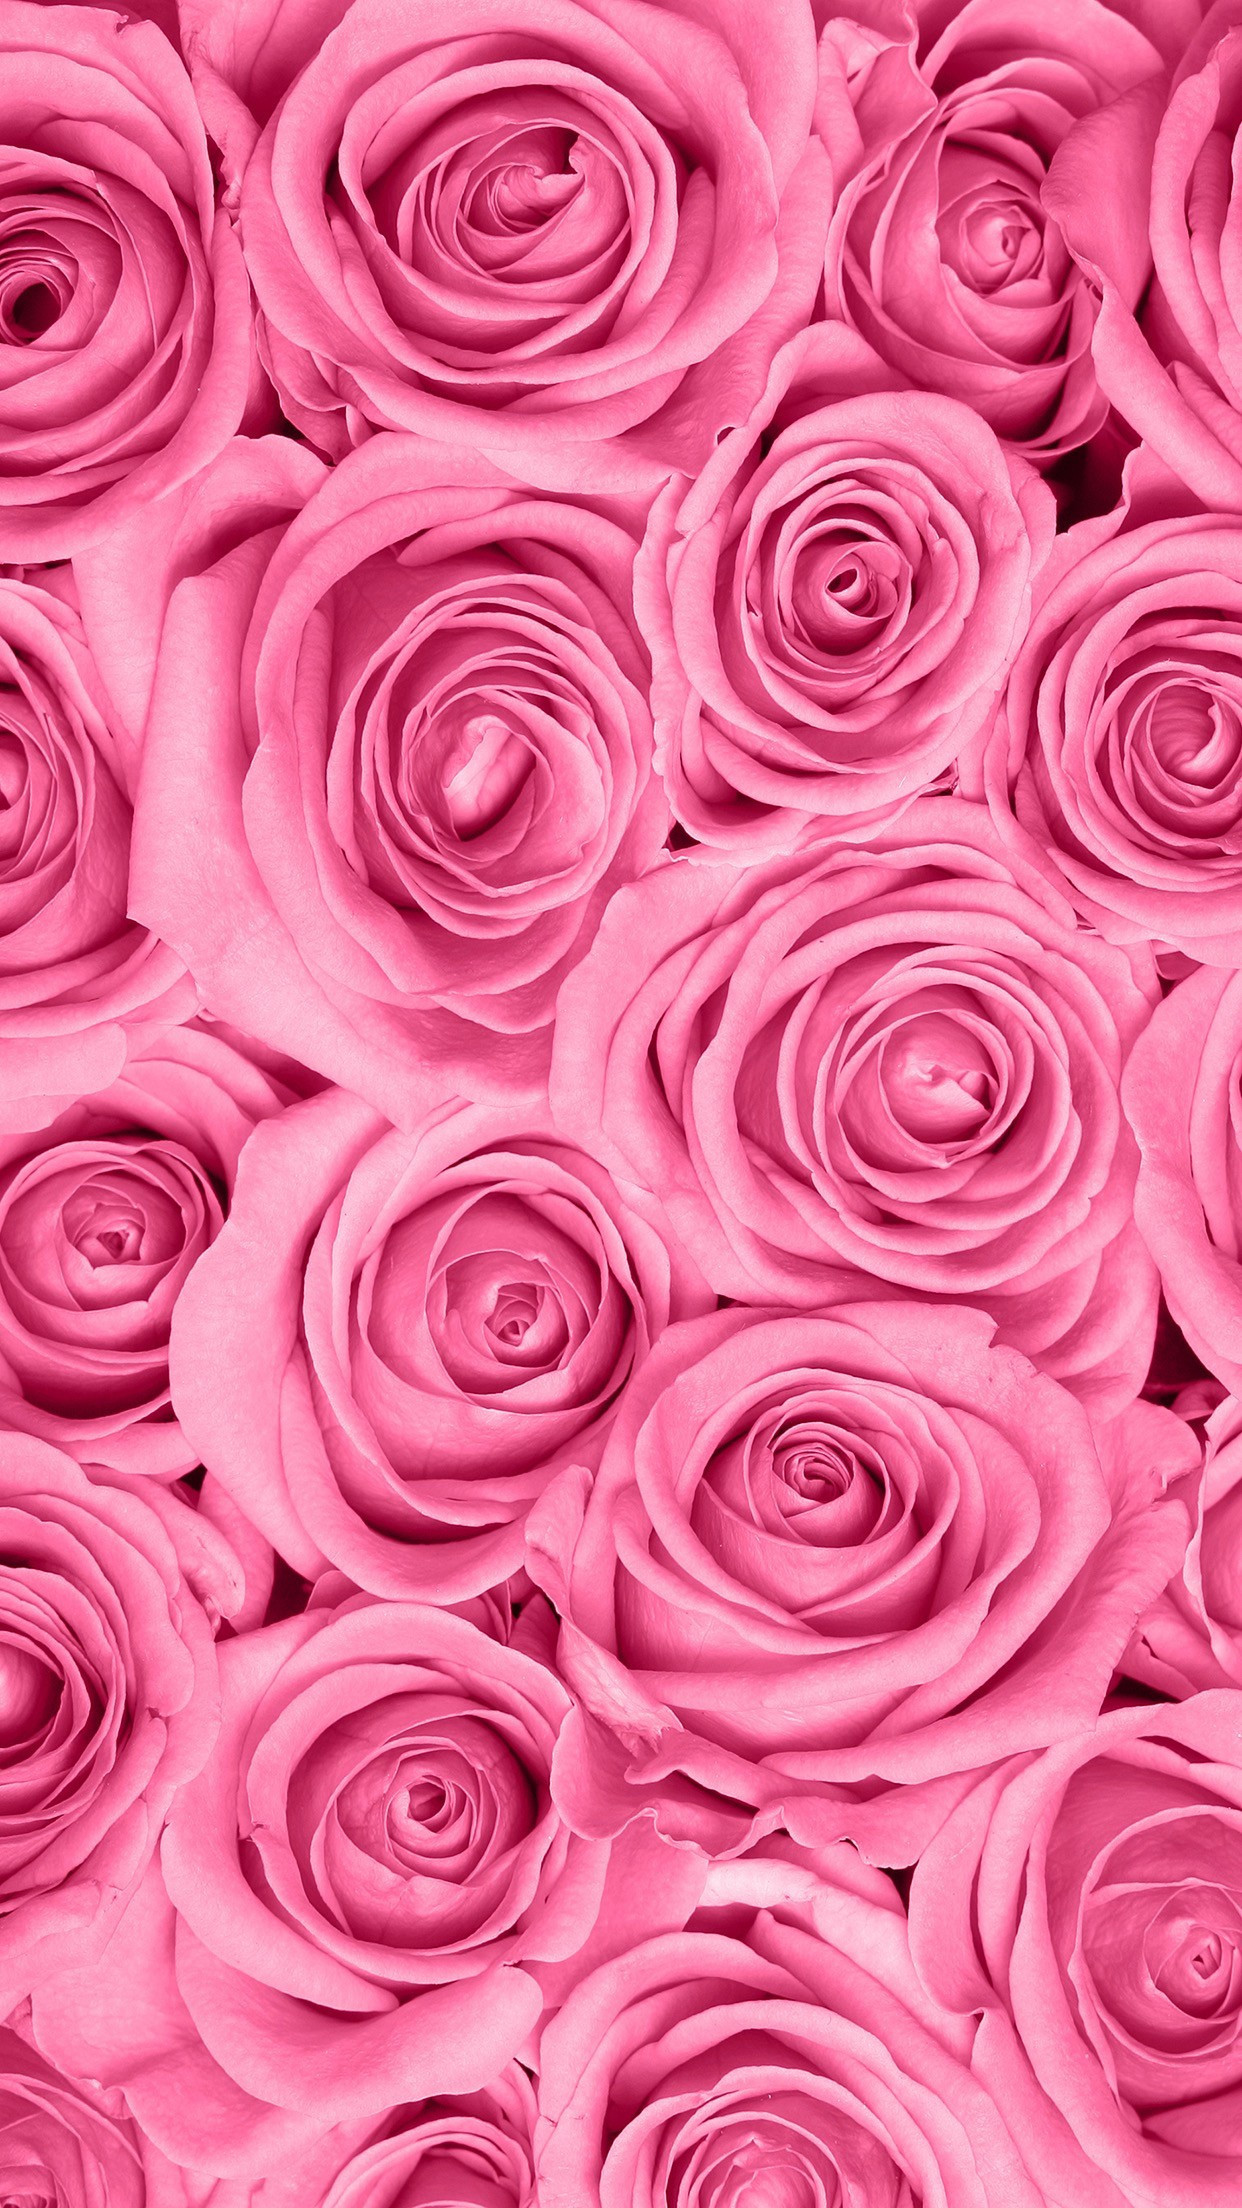 1242x2208 Pink and Black Roses Wallpaper Awesome Pink Rose Background Â·â 